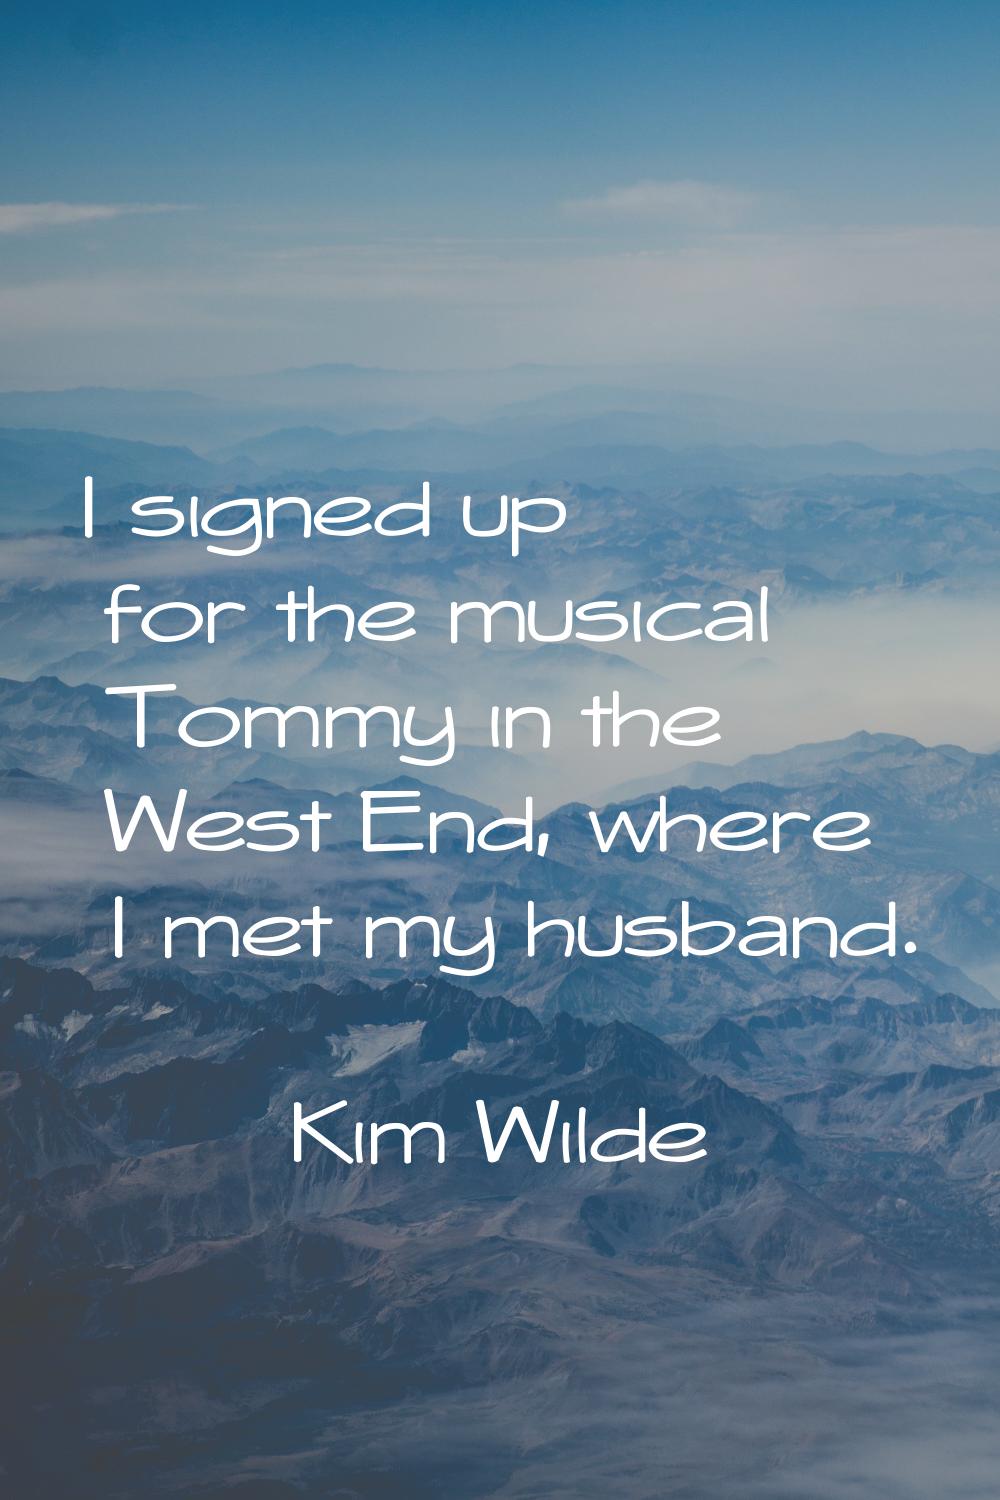 I signed up for the musical Tommy in the West End, where I met my husband.